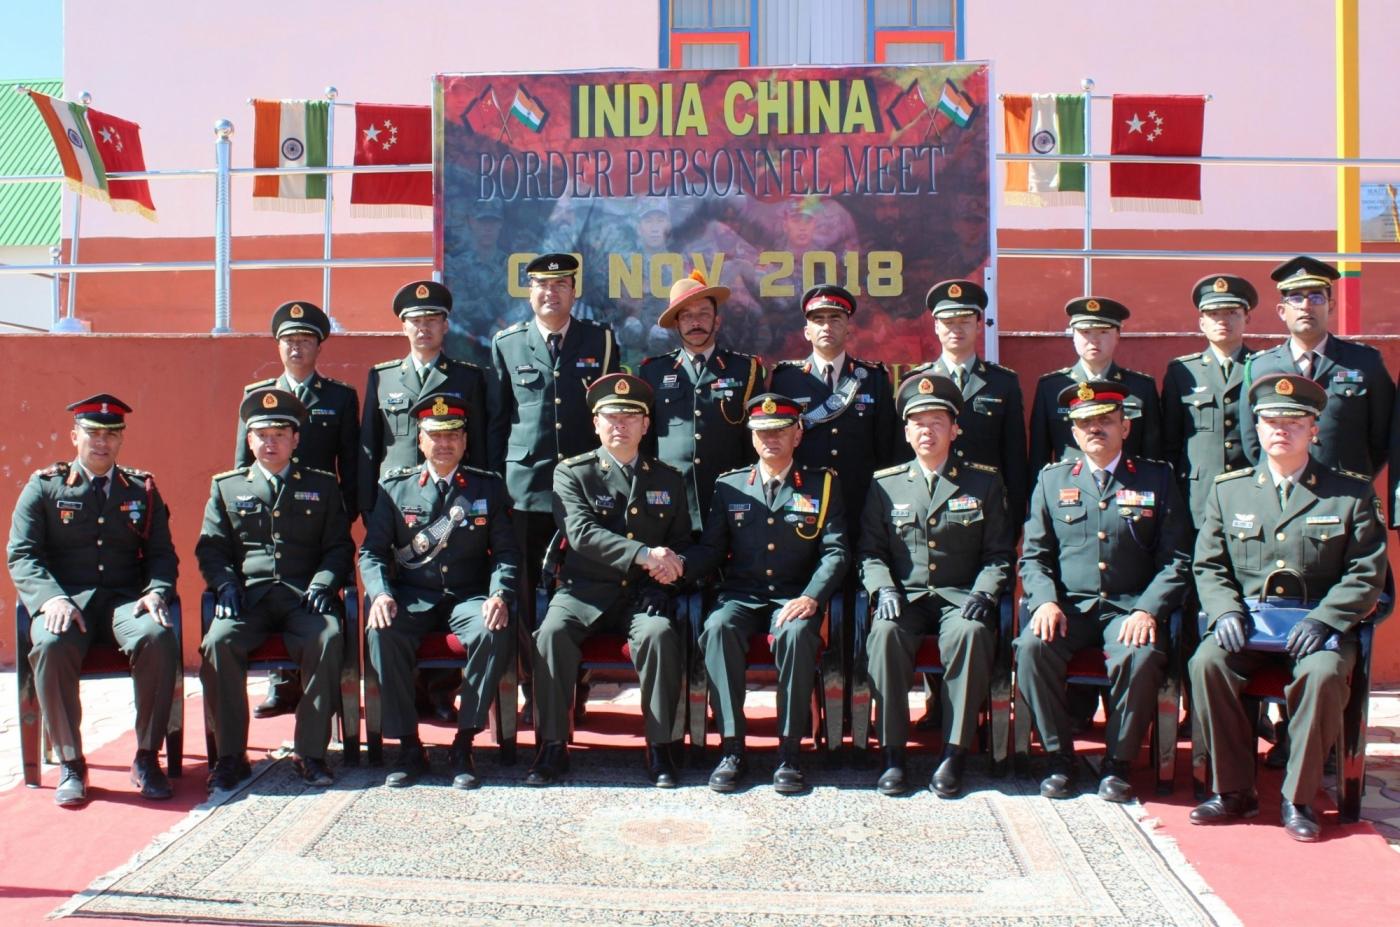 Bum-la: The Indian Army and China's People's Liberation Army (PLA) personnel during a first-ever border personnel meeting (BPM) at the Major General-level between Indian Army and Chinese PLA at Bum-la in Arunachal Pradesh on Nov 9, 2018. (Photo: IANS) by .